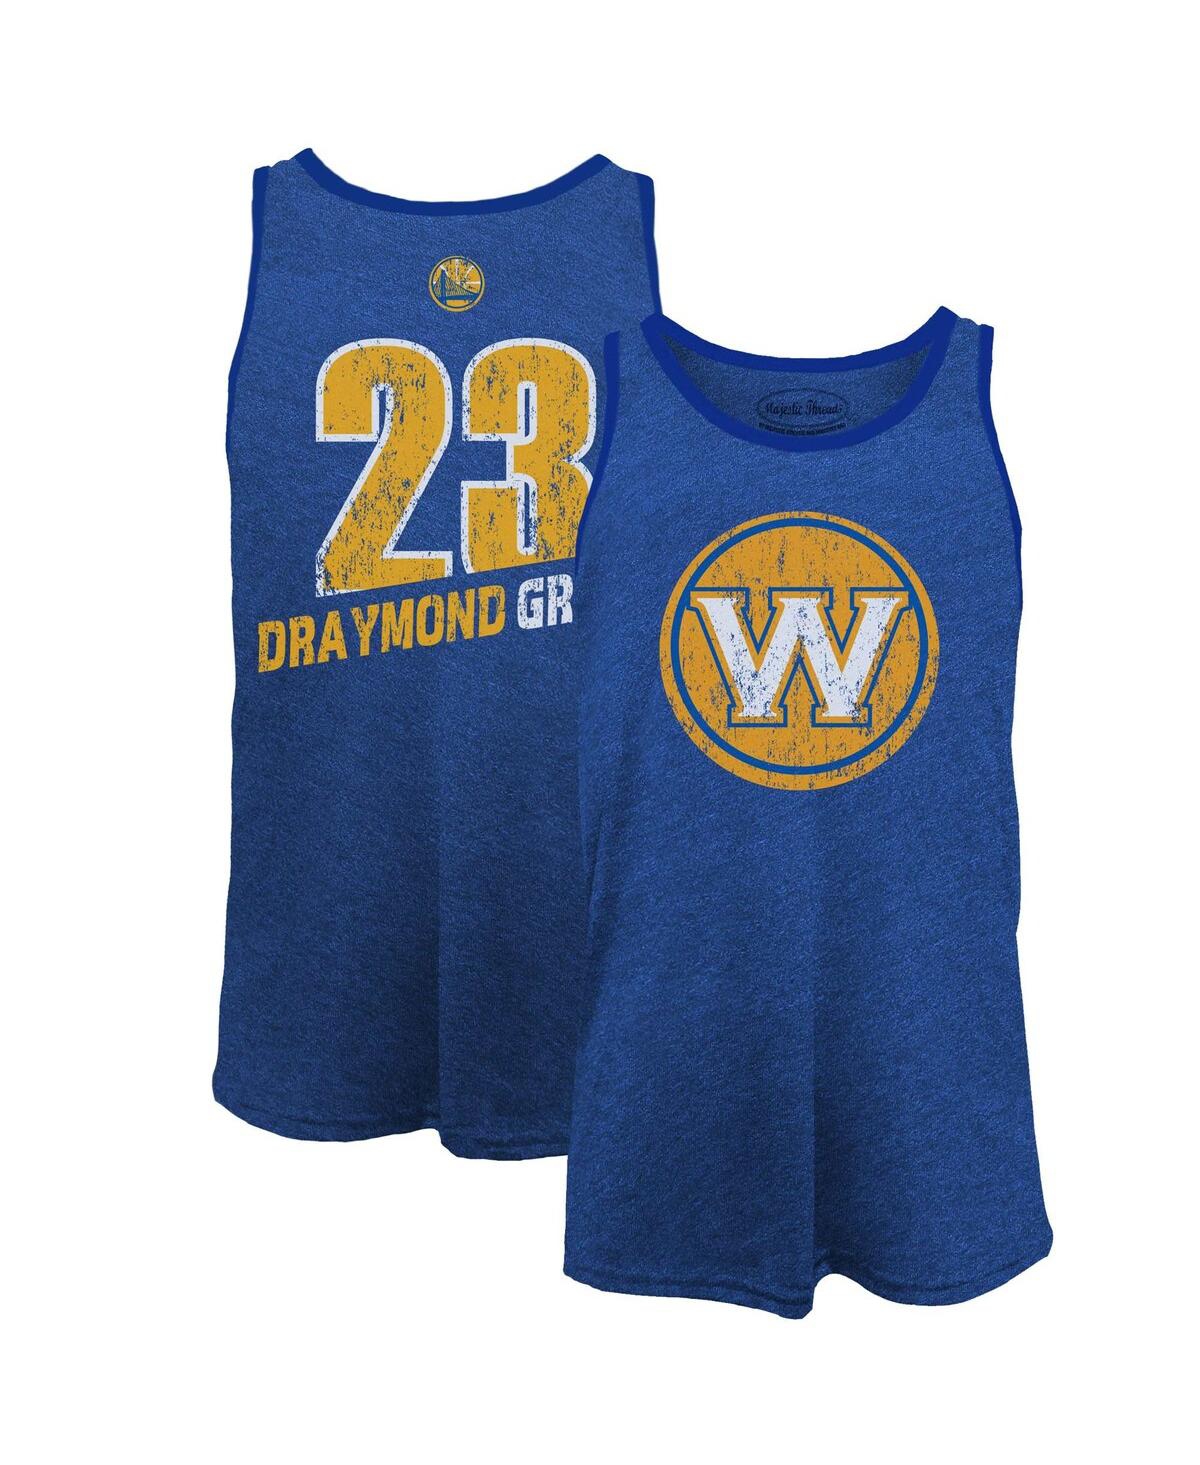 Men's Majestic Threads Draymond Green Royal Golden State Warriors Name and Number Tri-Blend Tank Top - Royal